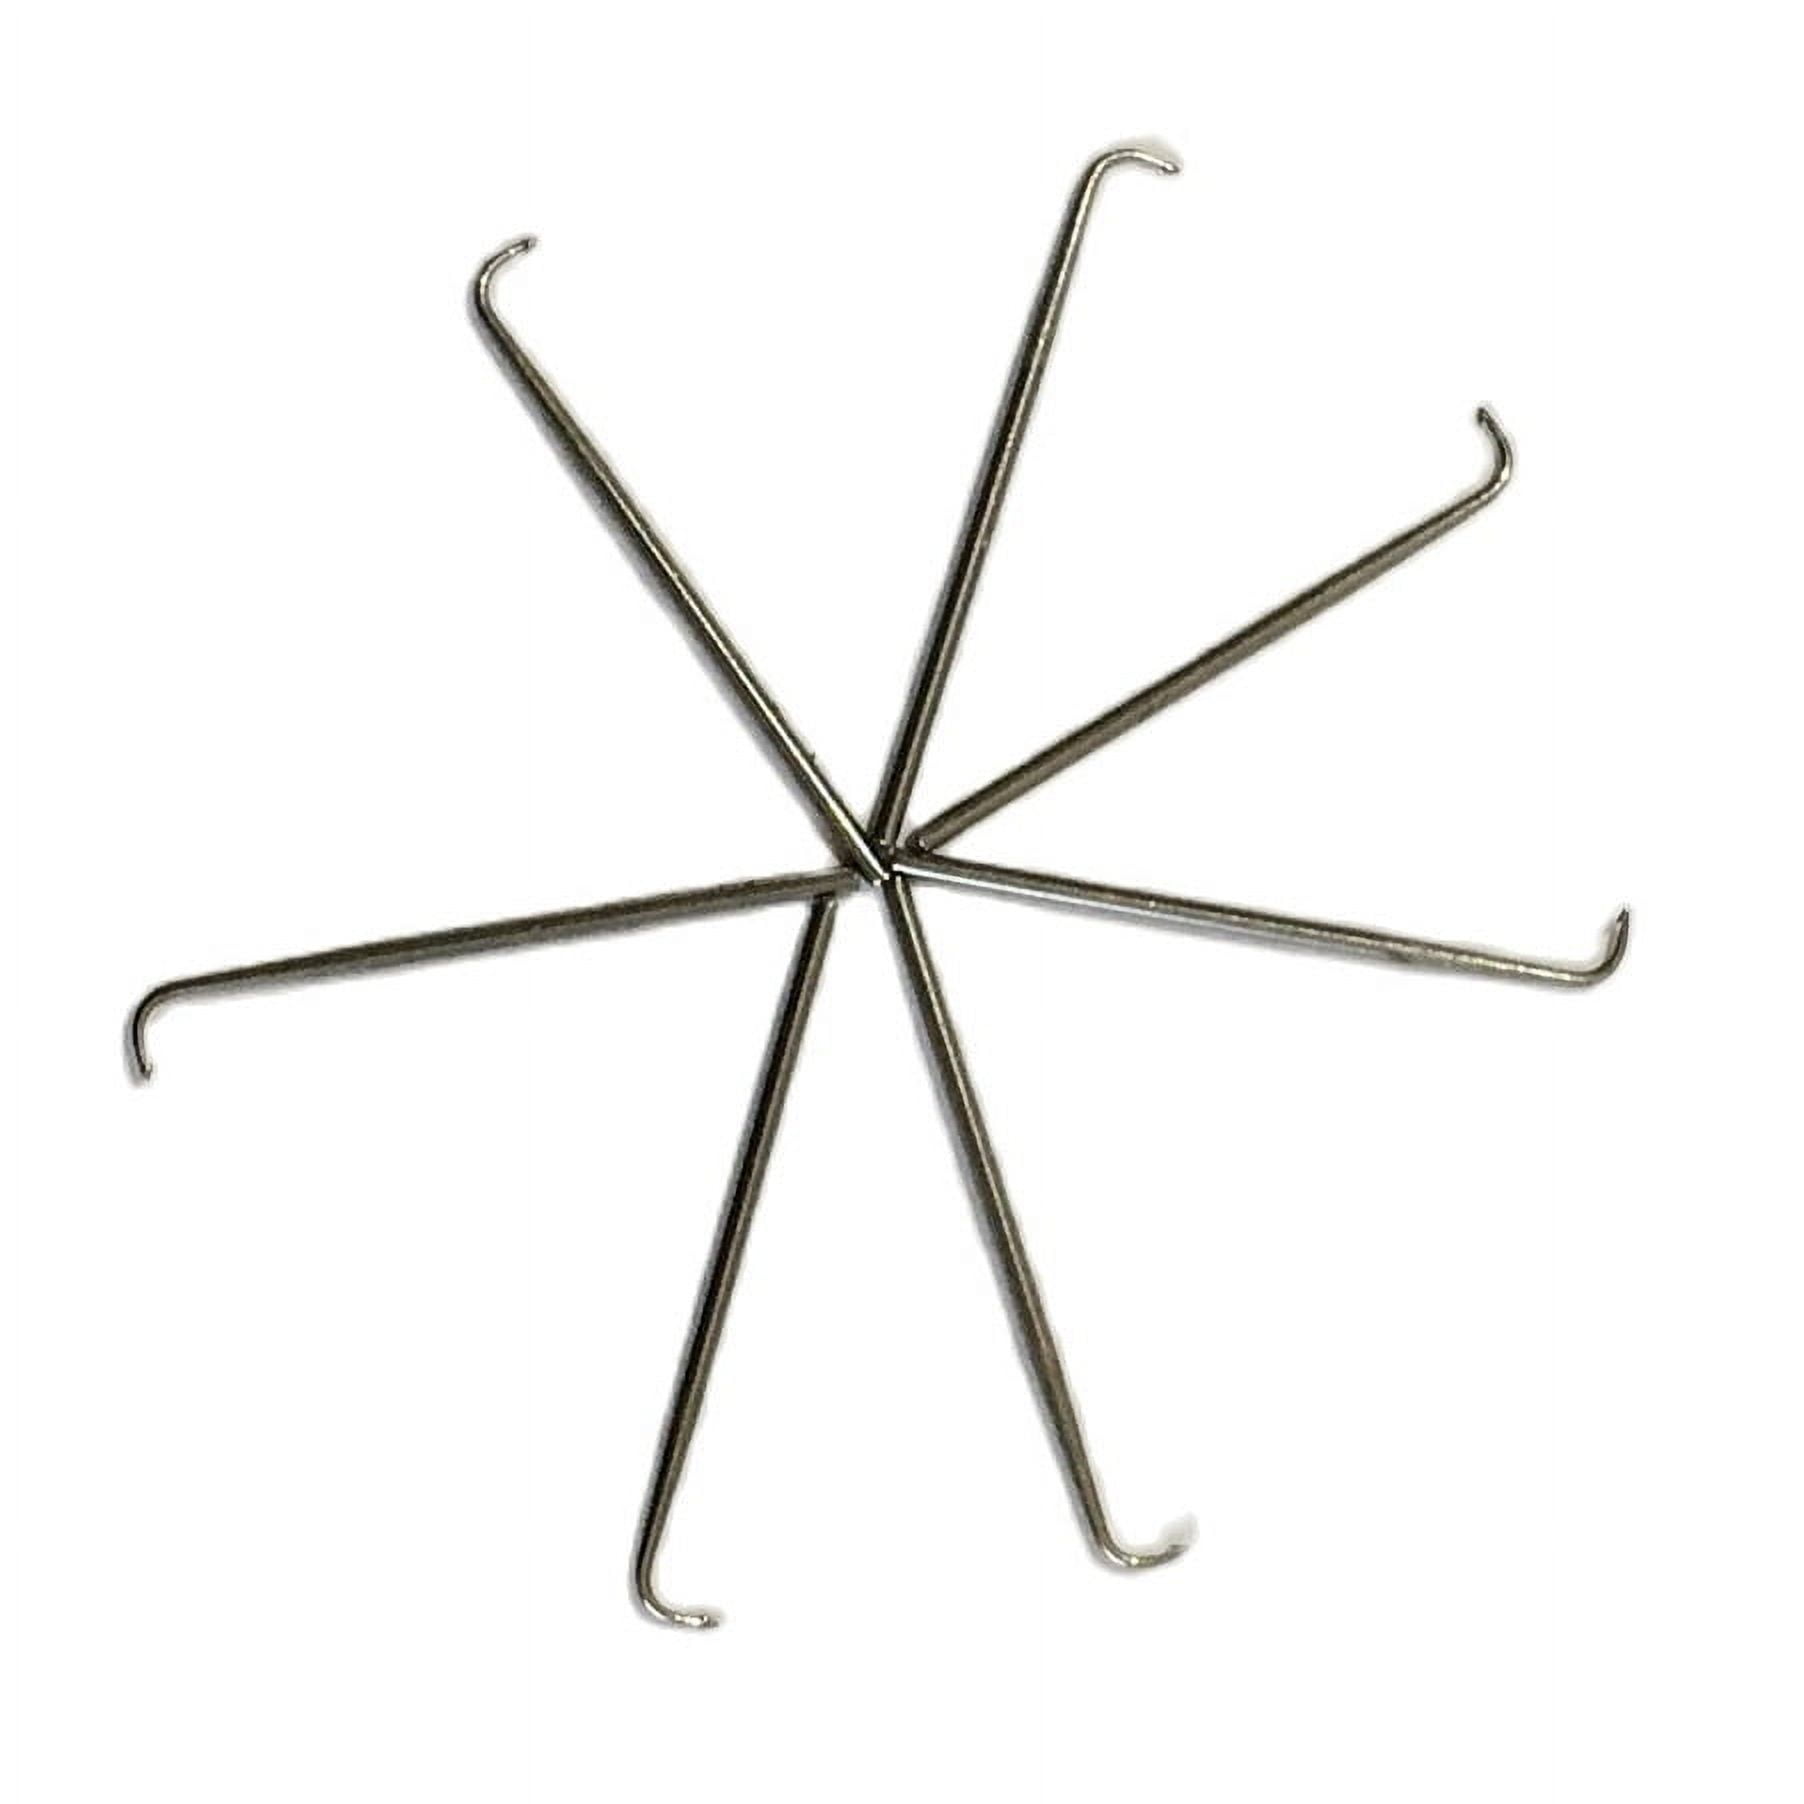 5Pcs Wig Hair Extension Hook Ventilating Needle for Wig Making